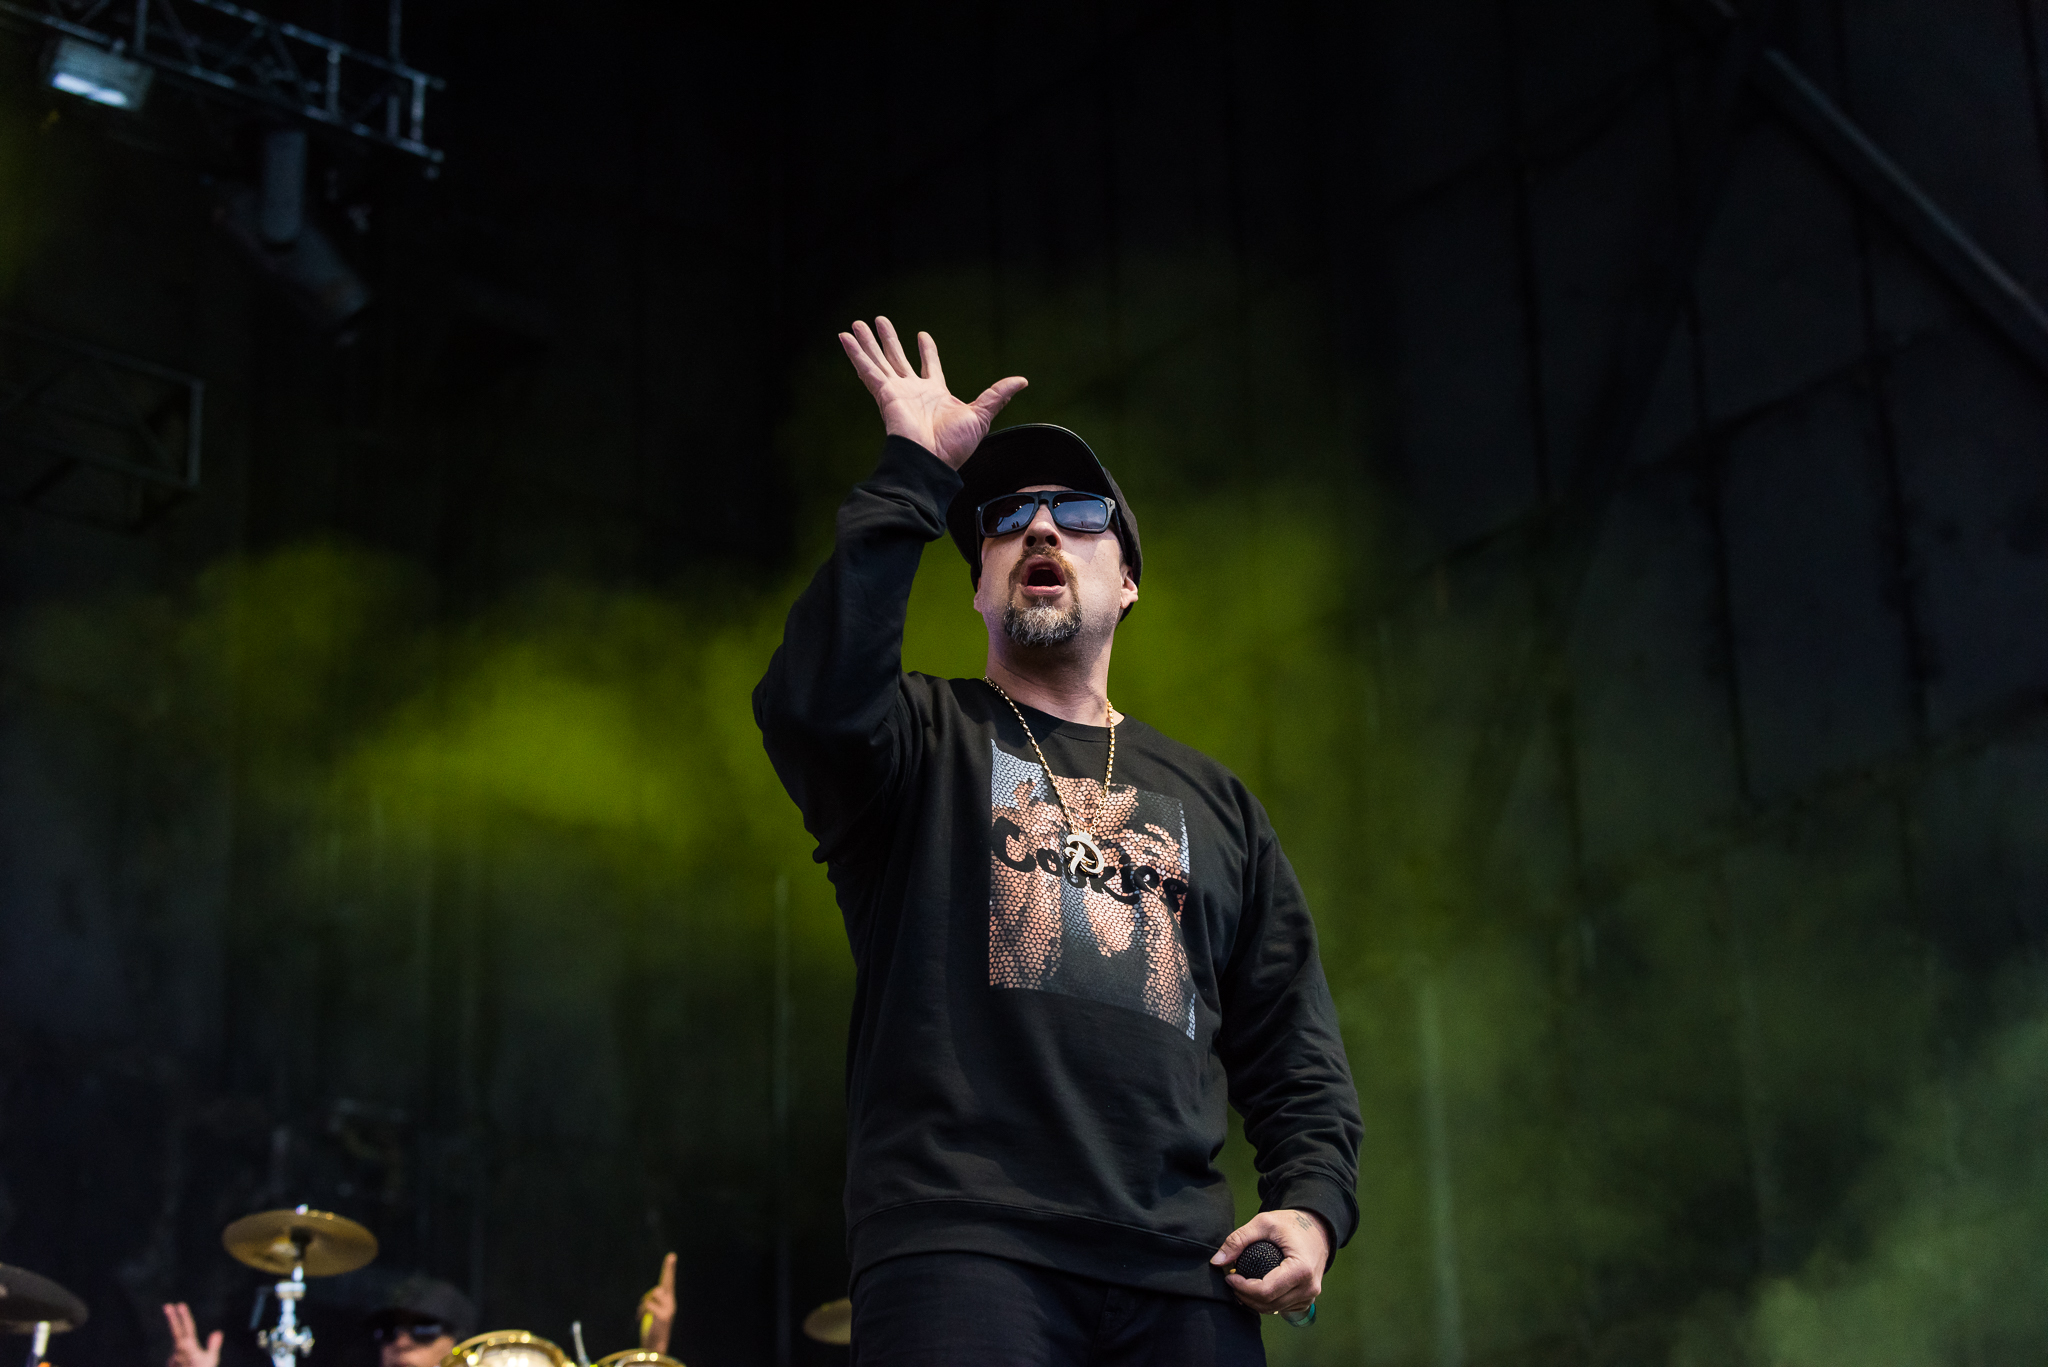 Breal of Cypress Hill